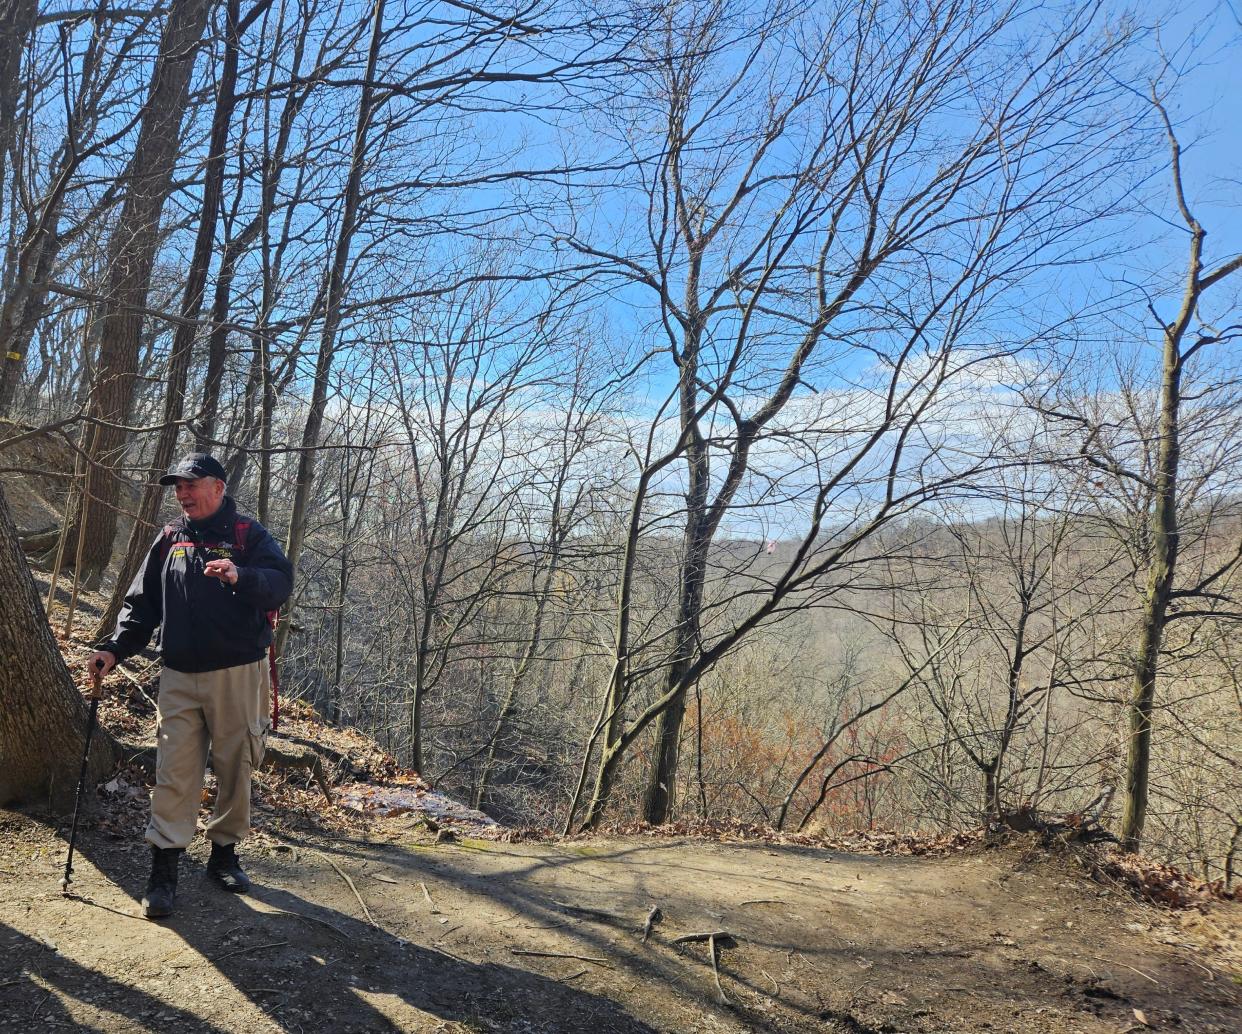 Ranger Joe Bost took hikers on a trip through Buzzard’s Roost Nature Preserve to the cliffs overlooking Paint Creek.